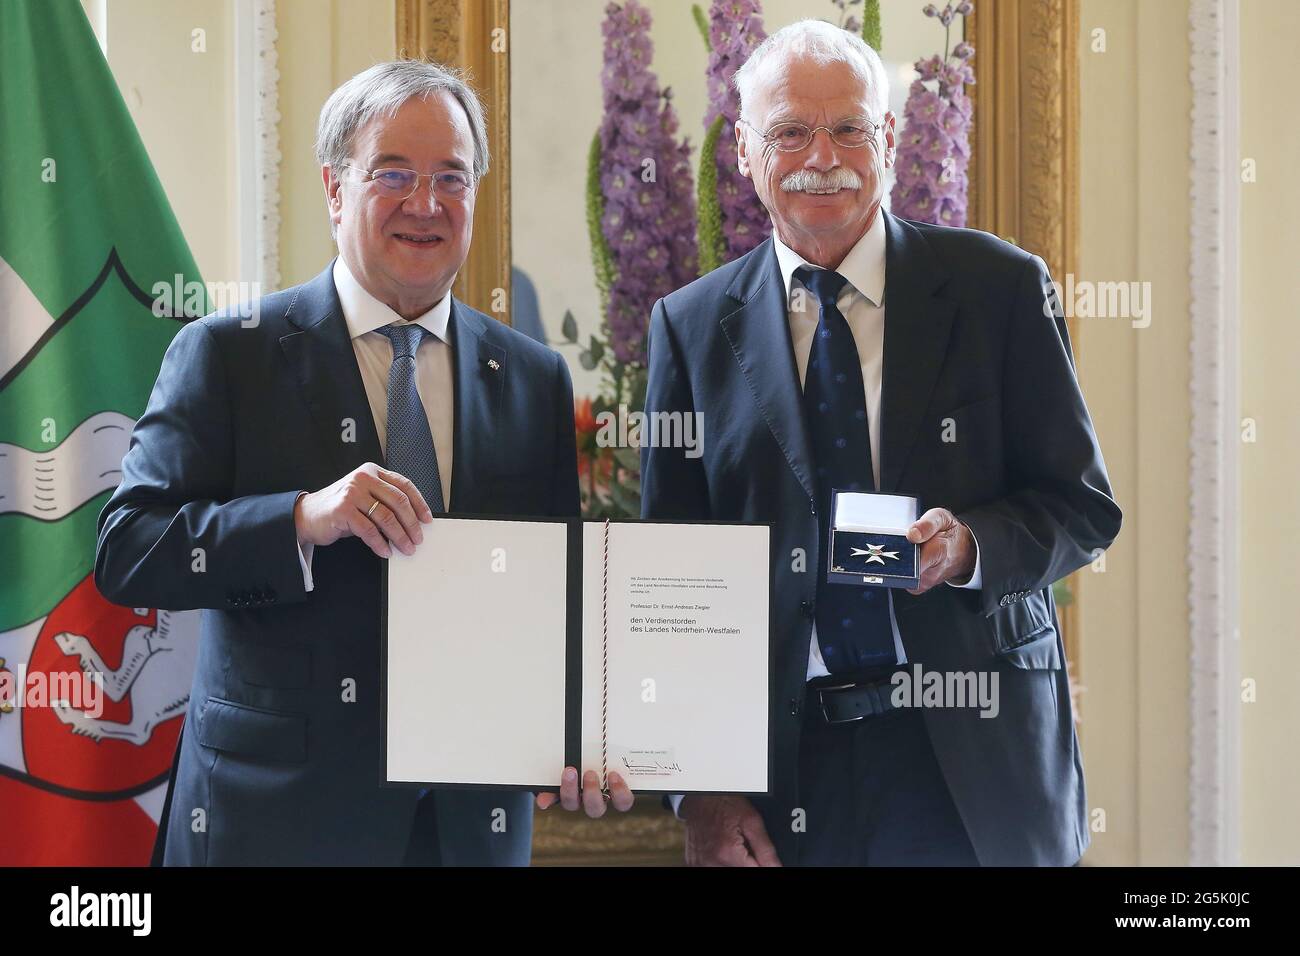 Duesseldorf, Germany. 28th June, 2021. Armin Laschet (CDU, l), Minister President of North Rhine-Westphalia, awards Prof. Dr. Ernst-Andreas Ziegler the State Order of Merit. Credit: David Young/dpa/Alamy Live News Stock Photo